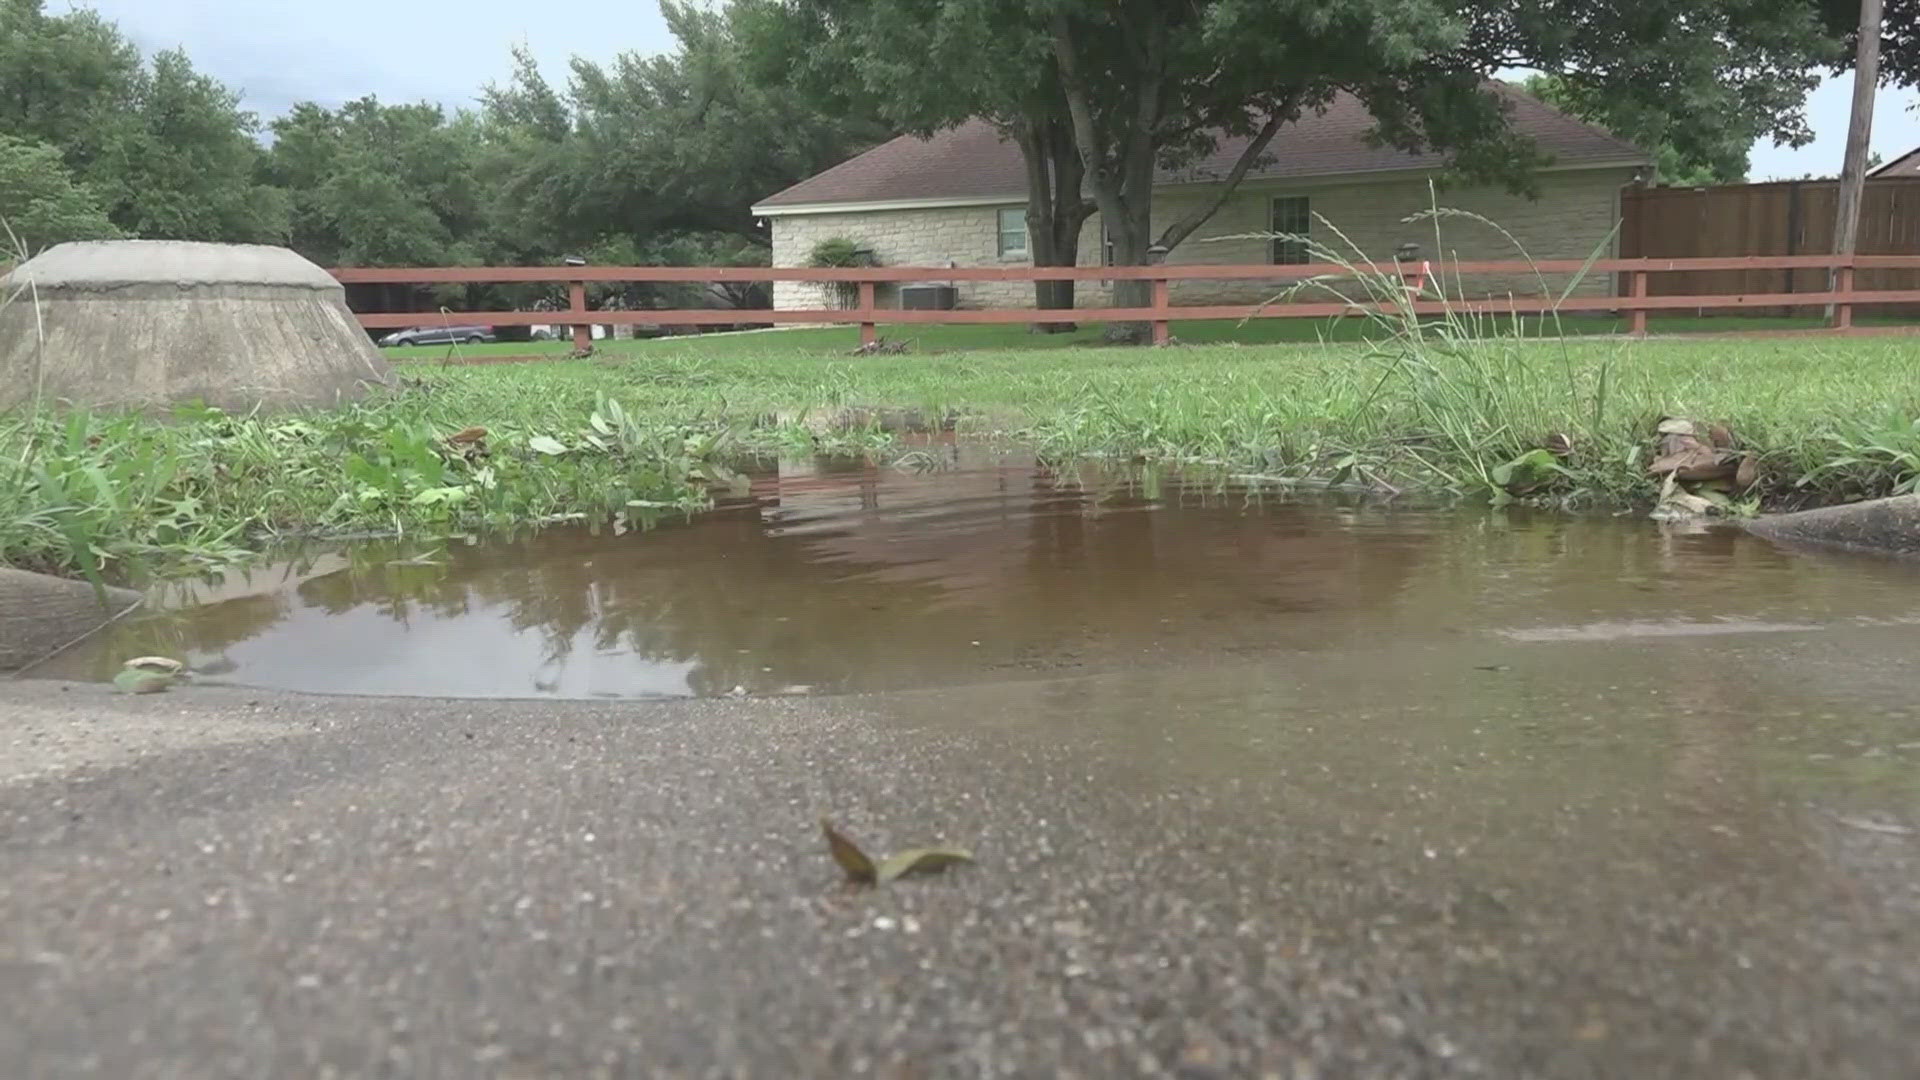 Nearby residents claim heavy downpours bring significant flooding around their homes.